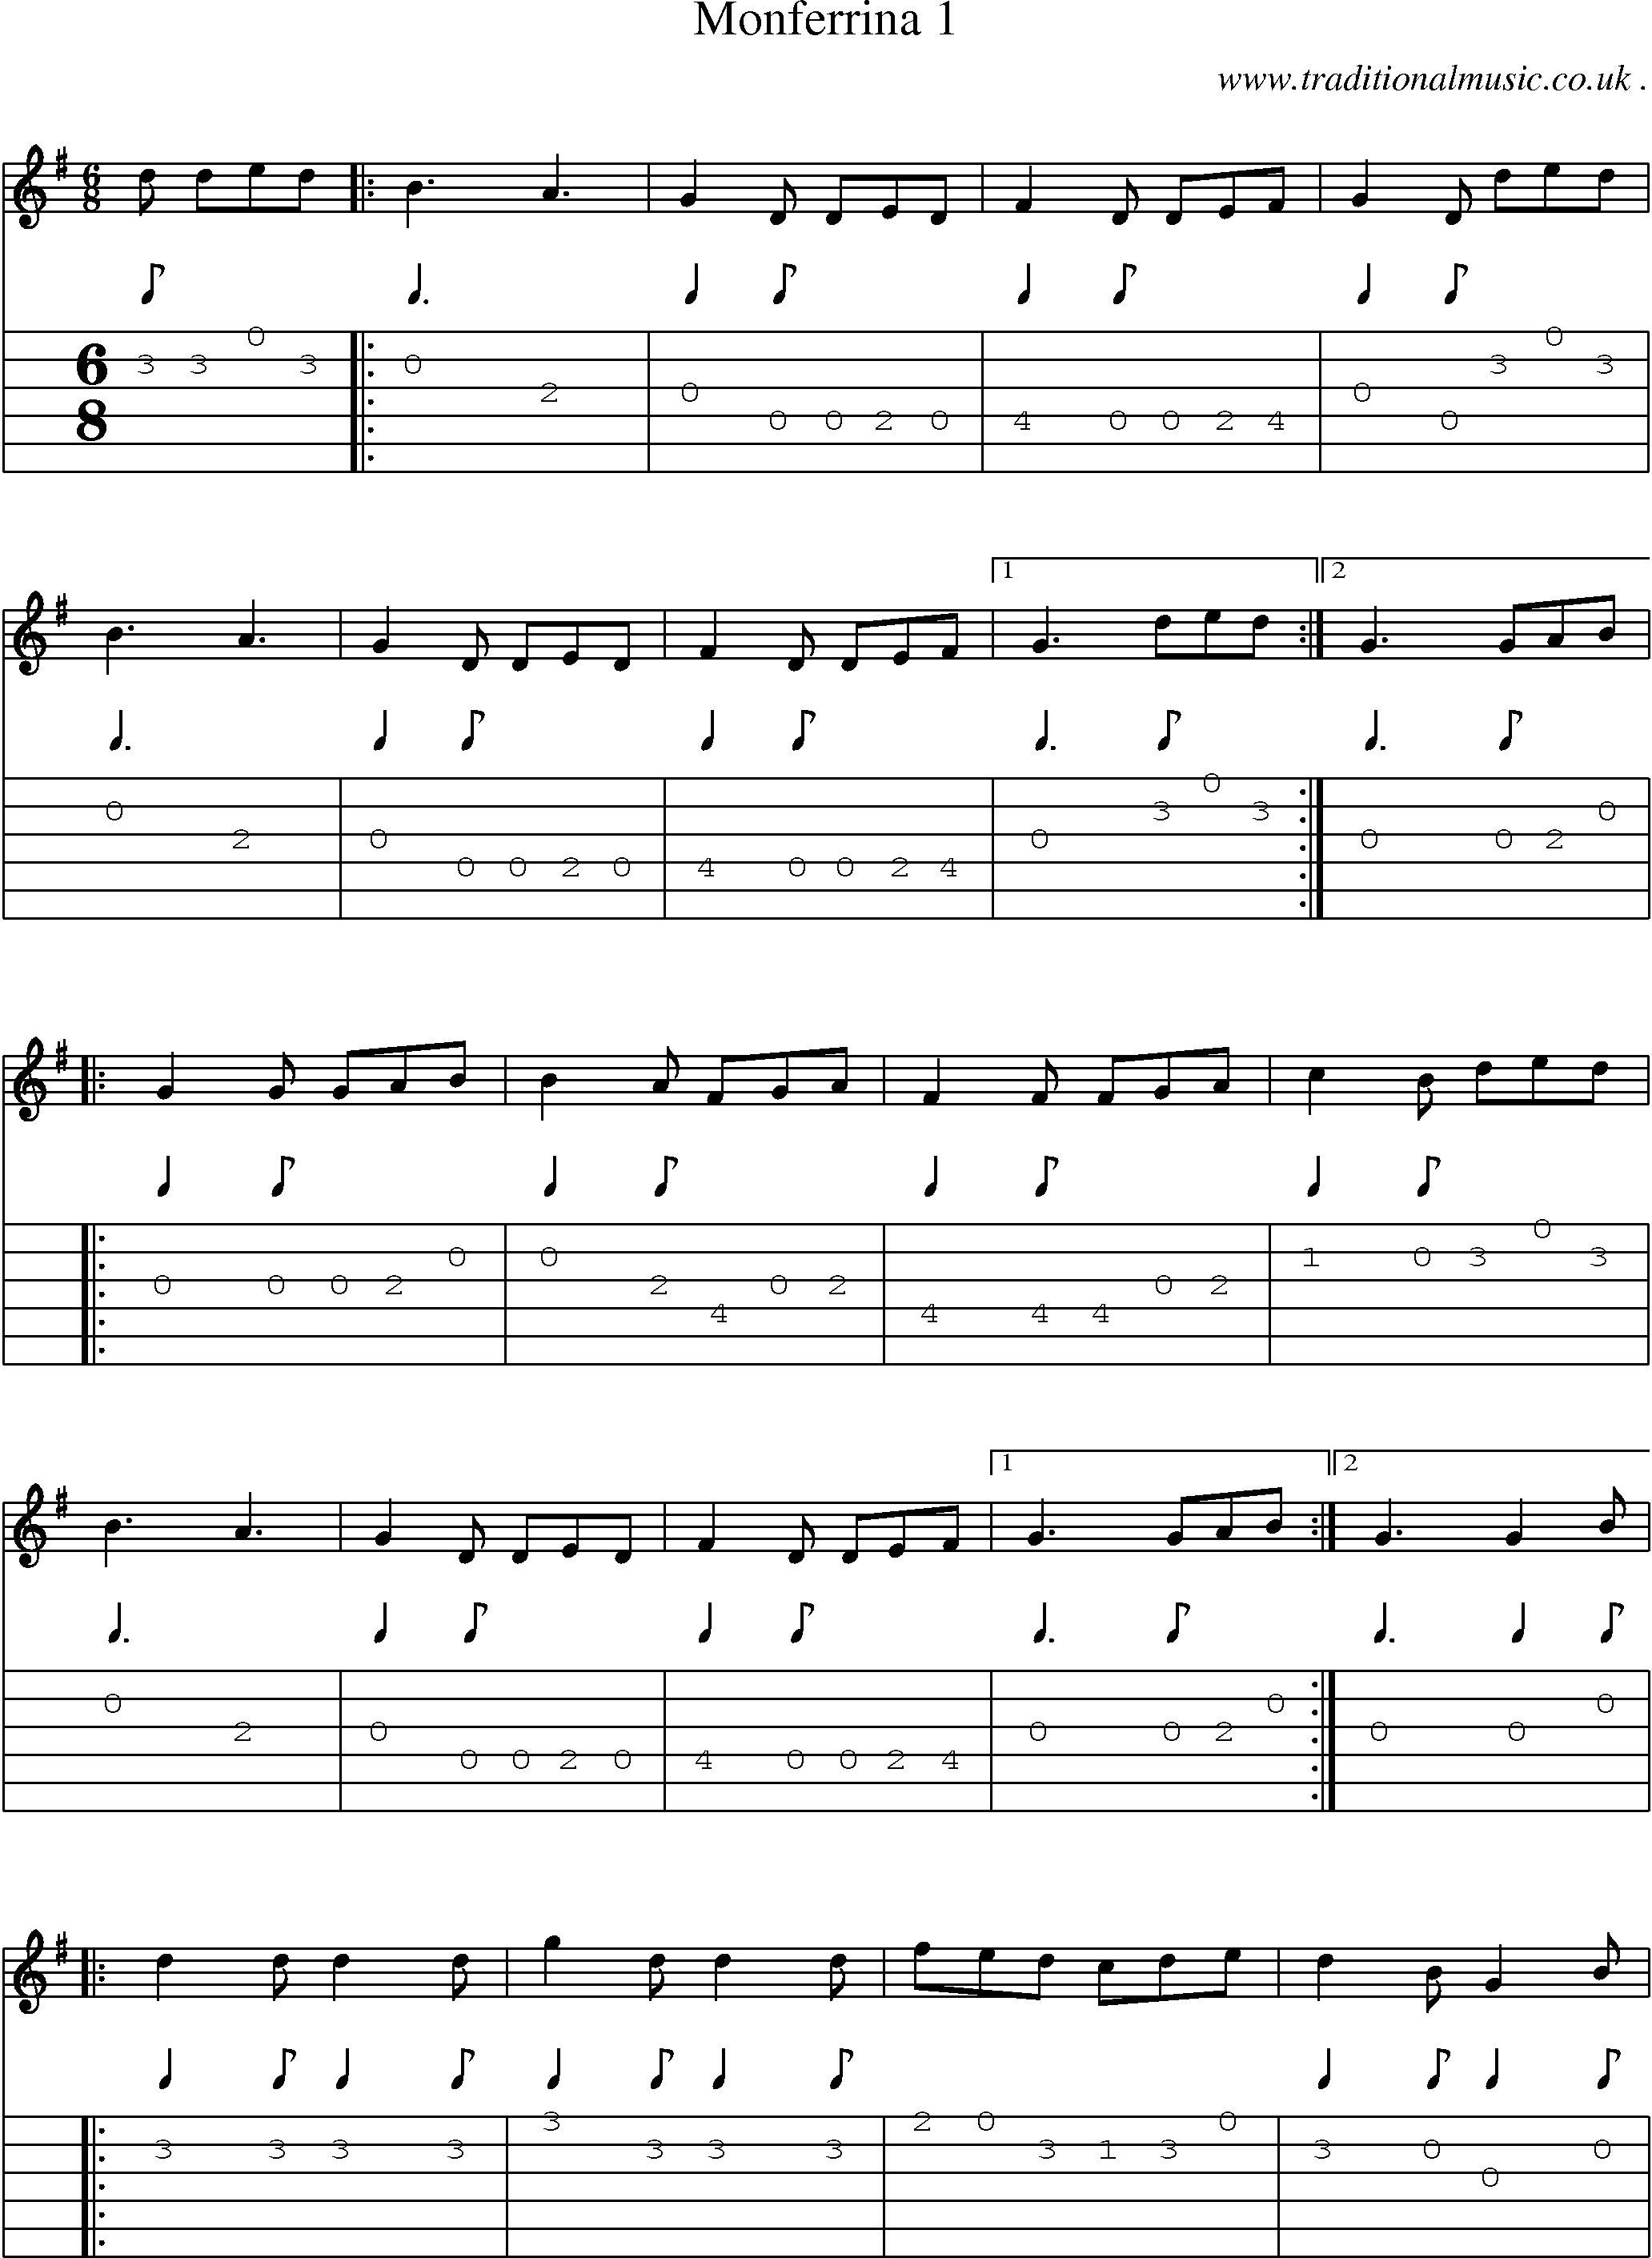 Sheet-Music and Guitar Tabs for Monferrina 1